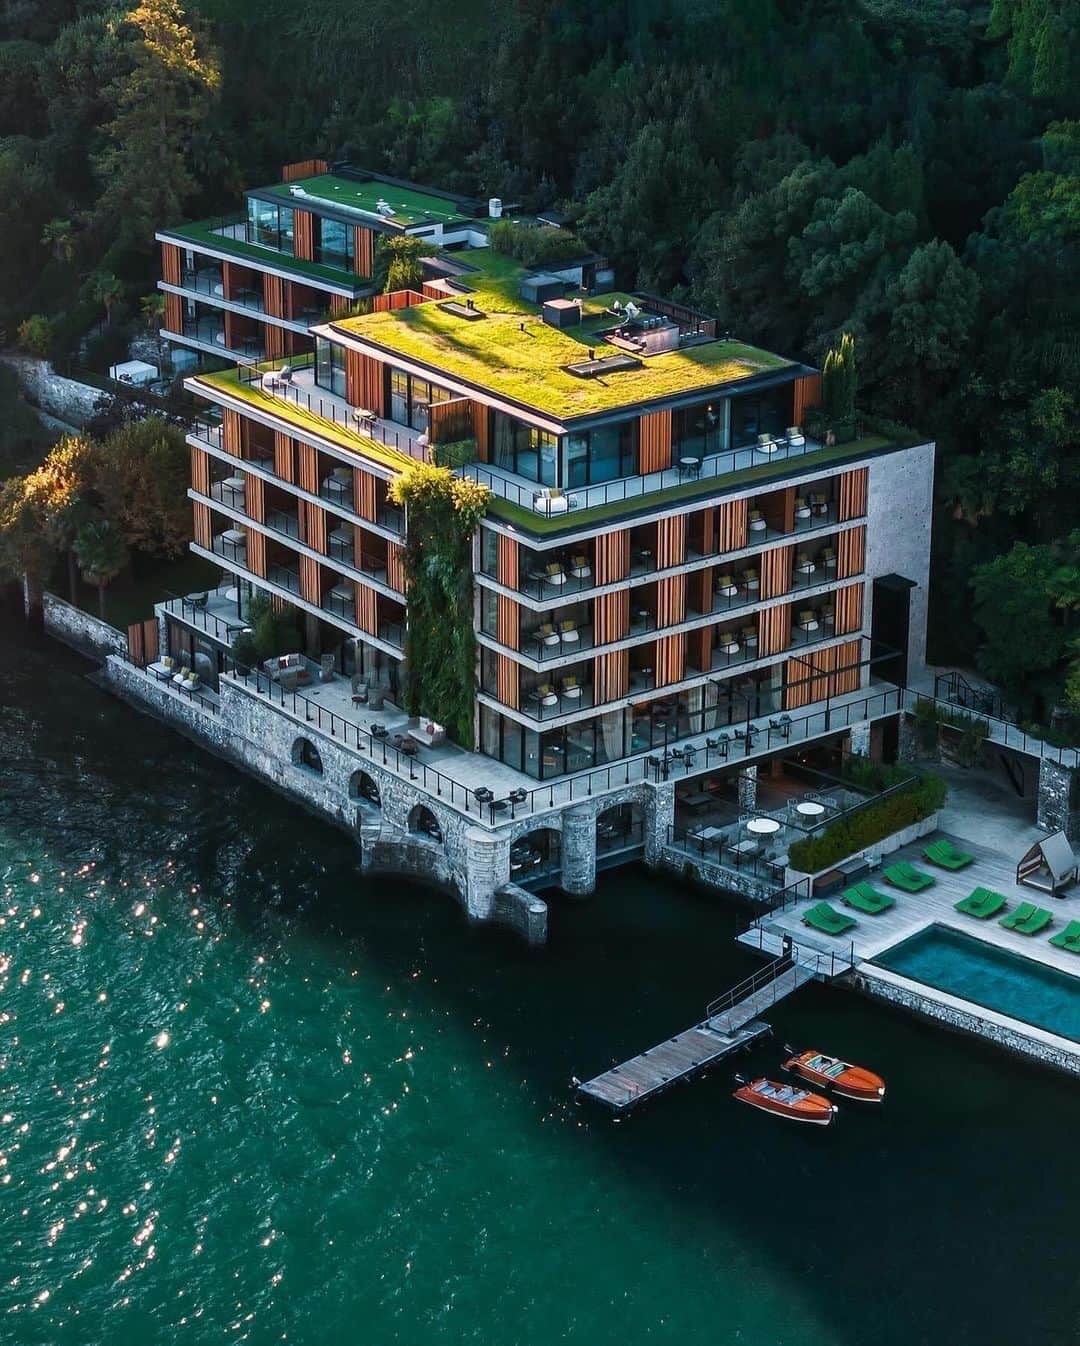 PicLab™ Sayingsのインスタグラム：「Lake Como has long been known as an iconic destination in Italy. 🚤 🇮🇹 Located at the foot of the alps, this place offers jaw-dropping views and luxurious modern stays like the one pictured here. Have you checked Como off of your bucket list?   📌 @ilsereno  🎥 @jeremyaustiin」